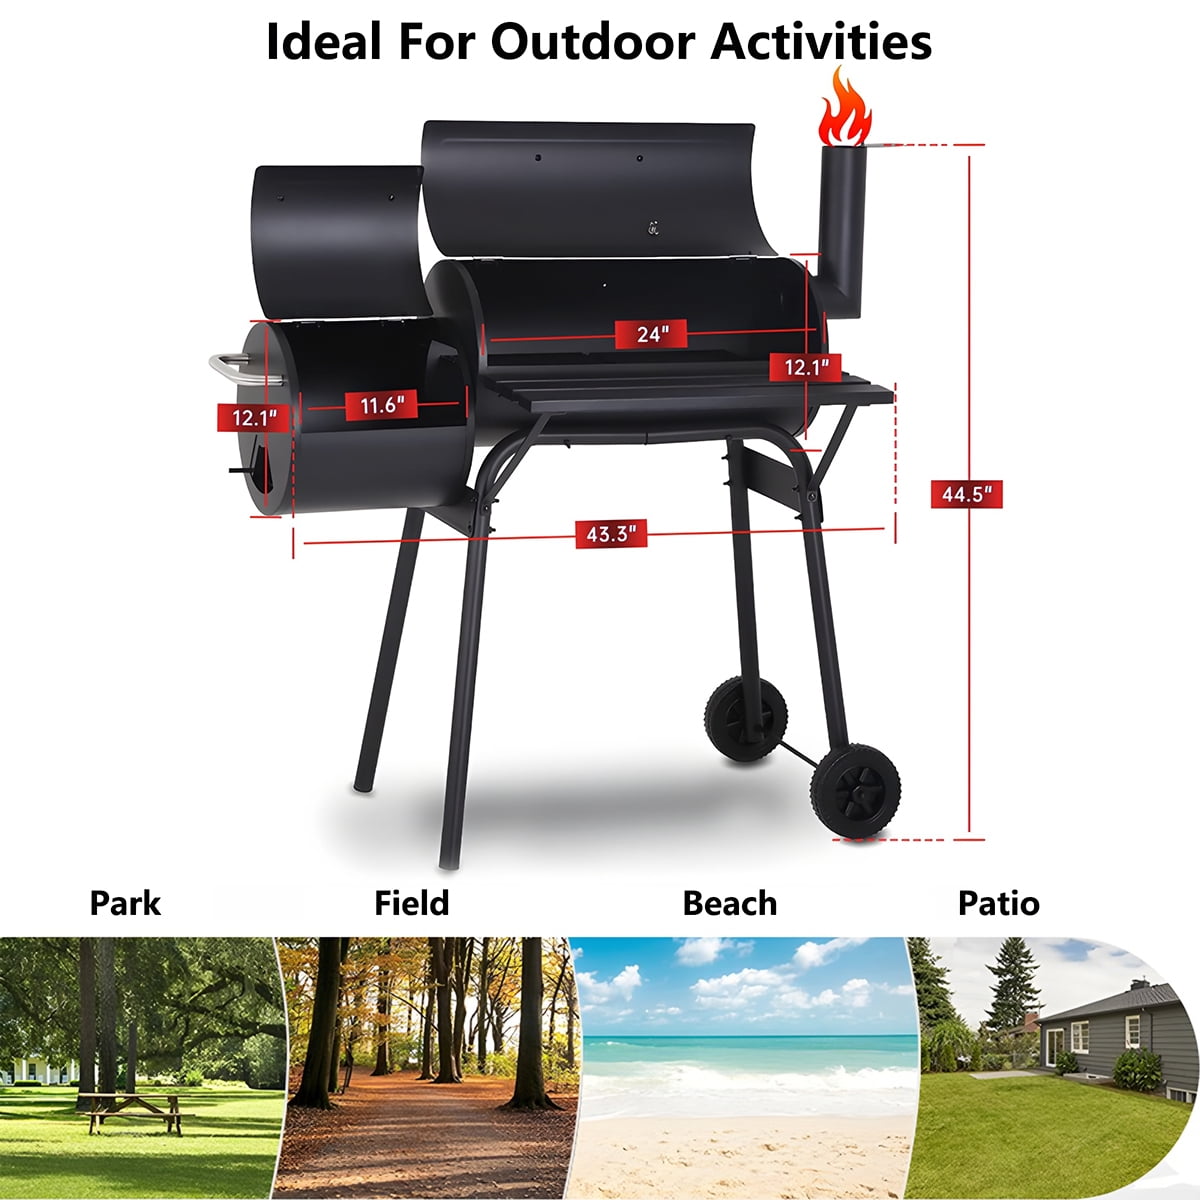 AKIUDEX Outdoor Portable BBQ Charcoal Grill with Offset Smoker for Pit Patio Backyard, Black